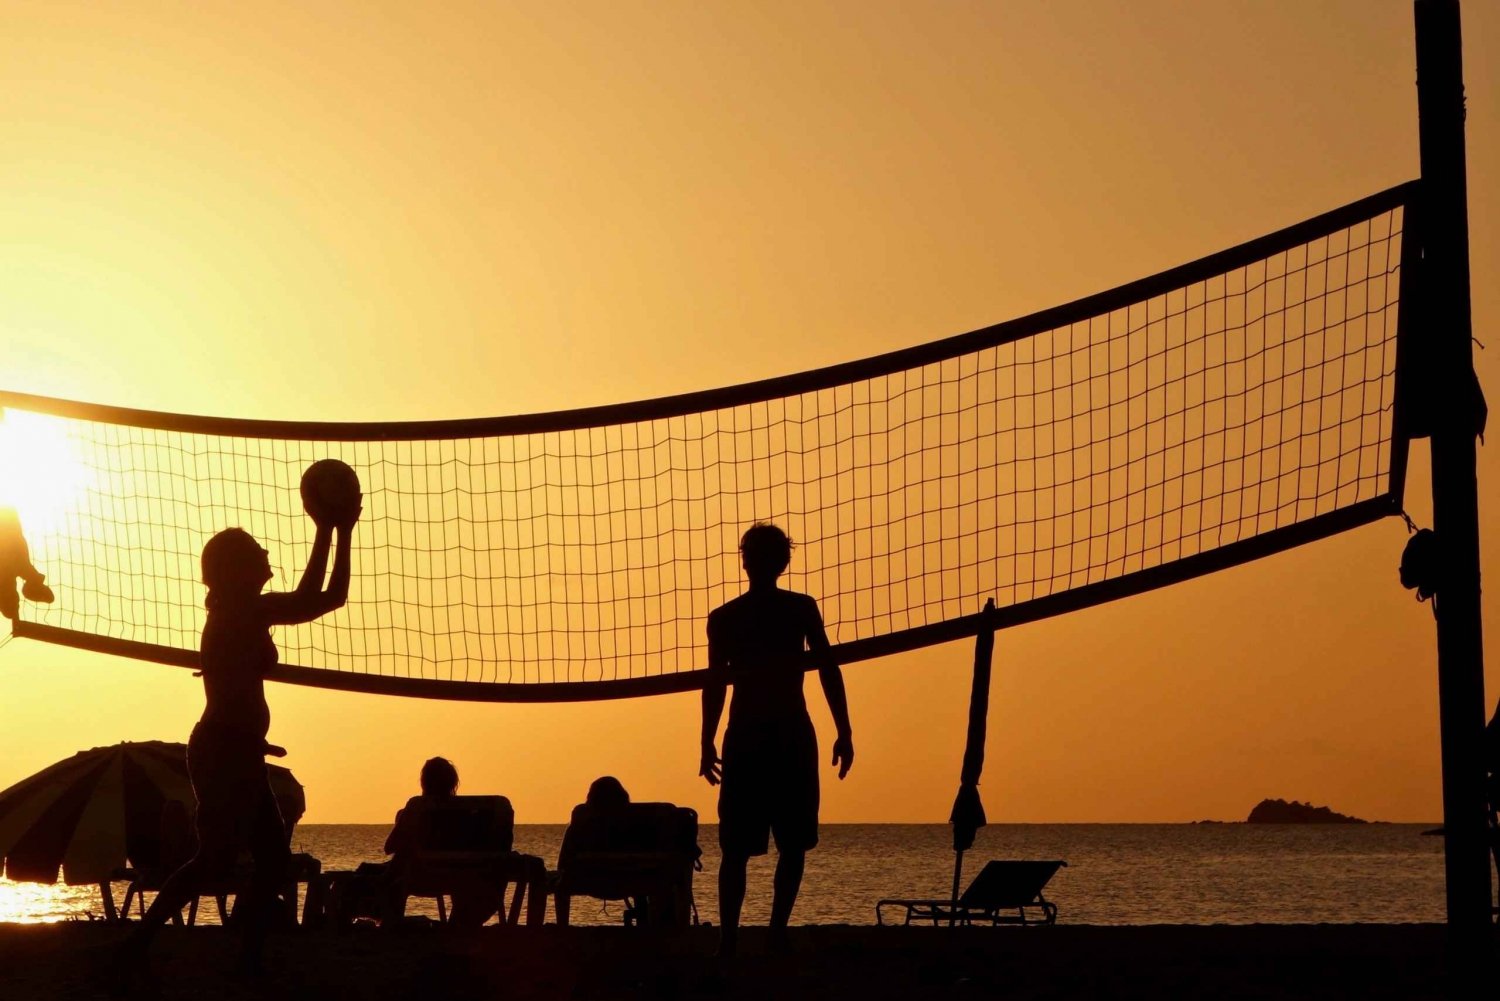 Beach Volley Experience - 1h